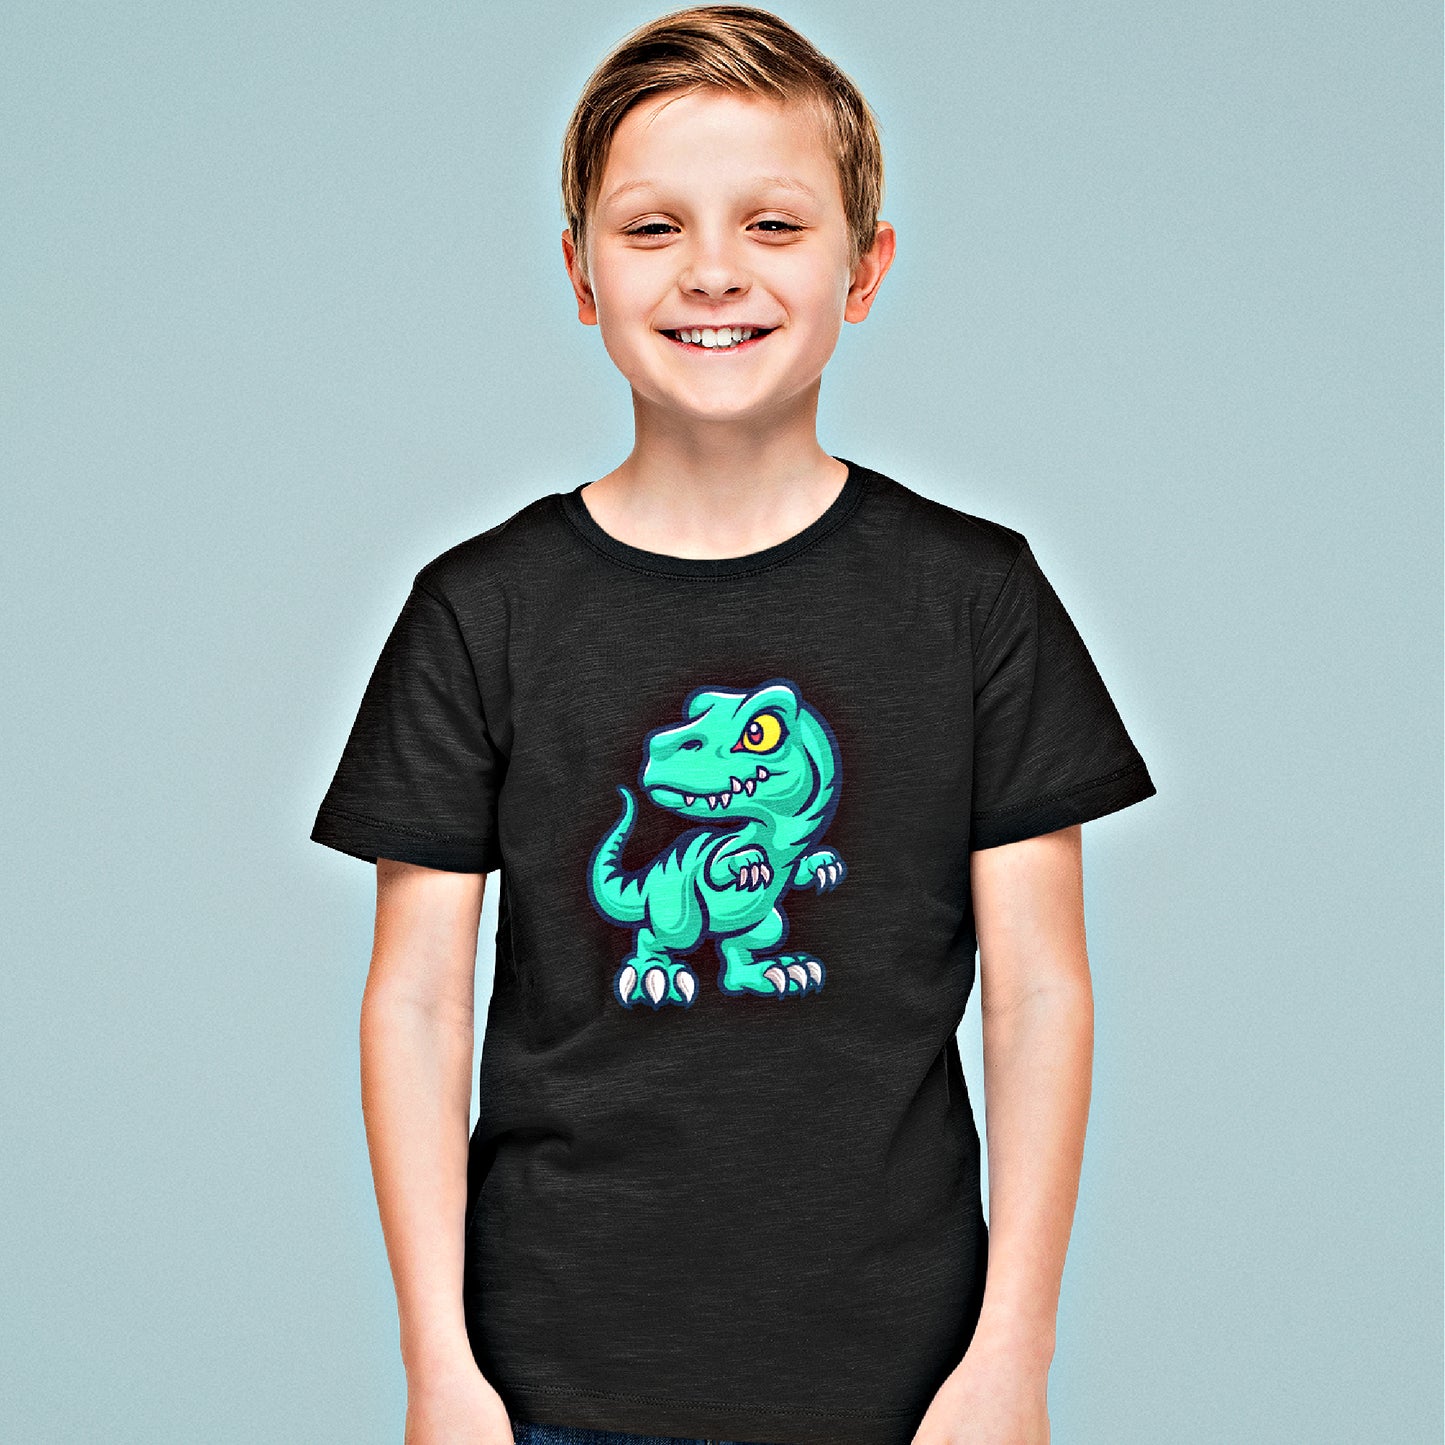 Mock up of smiling boy wearing our black t-shirt